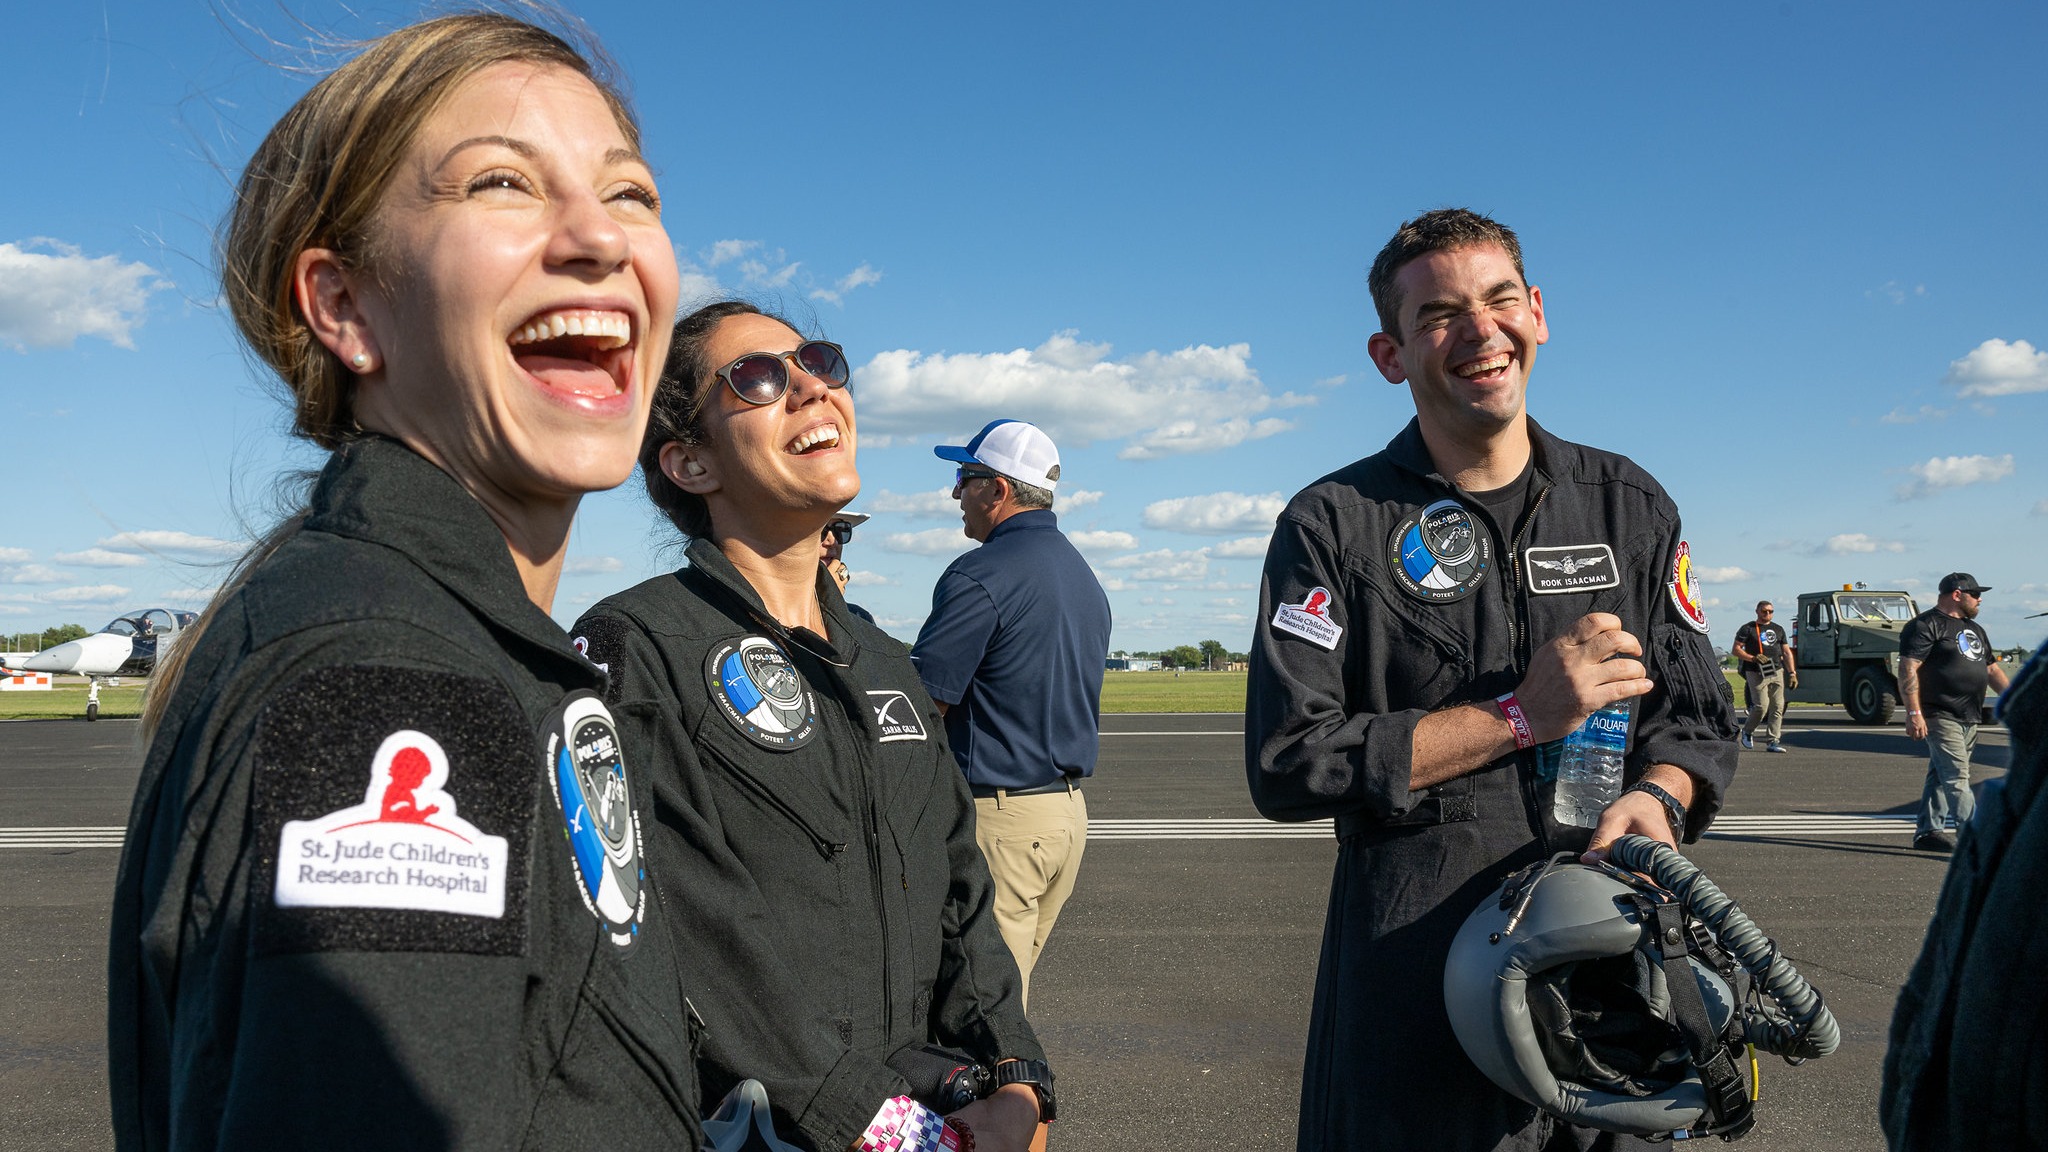 Polaris Dawn crew members react during jet training at the EAA AirVenture Oshkosh show in Wisconsin in July 2022.